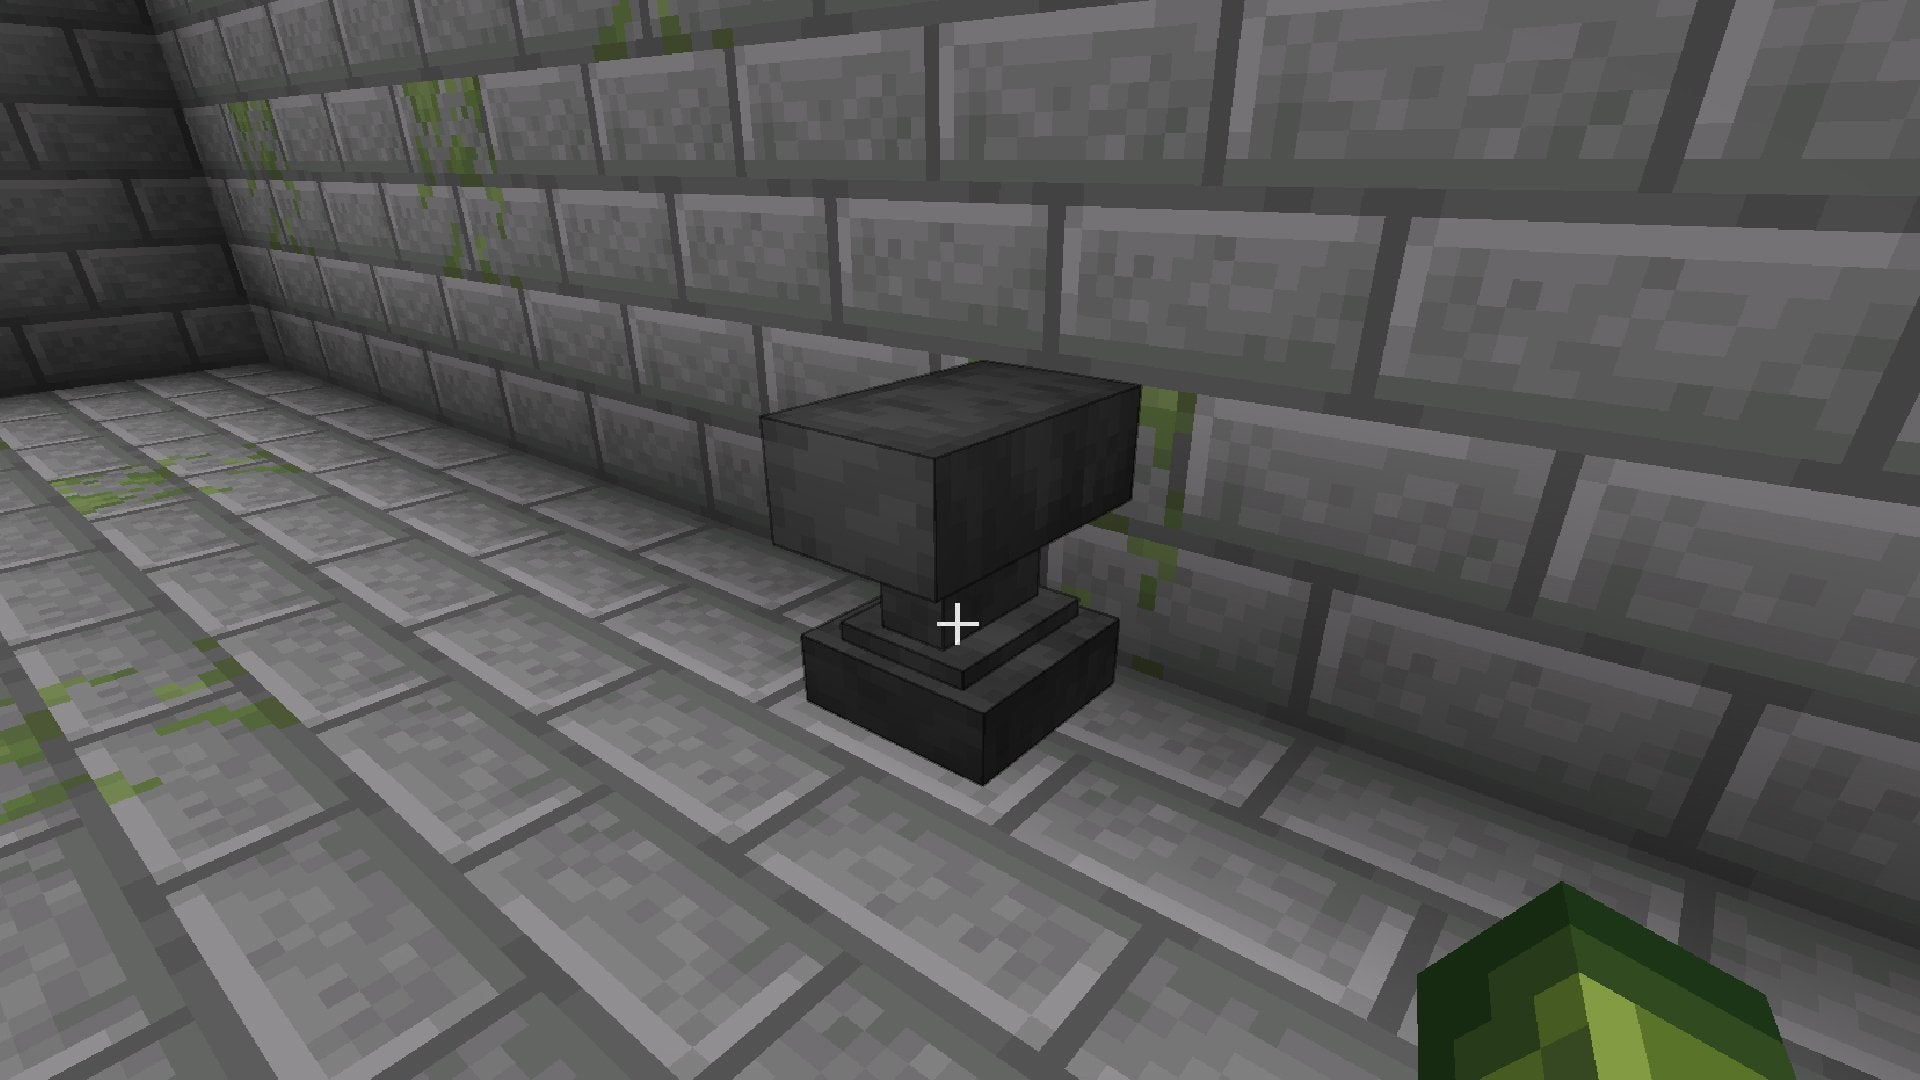 An Anvil in a room made of Stone Bricks in Minecraft.